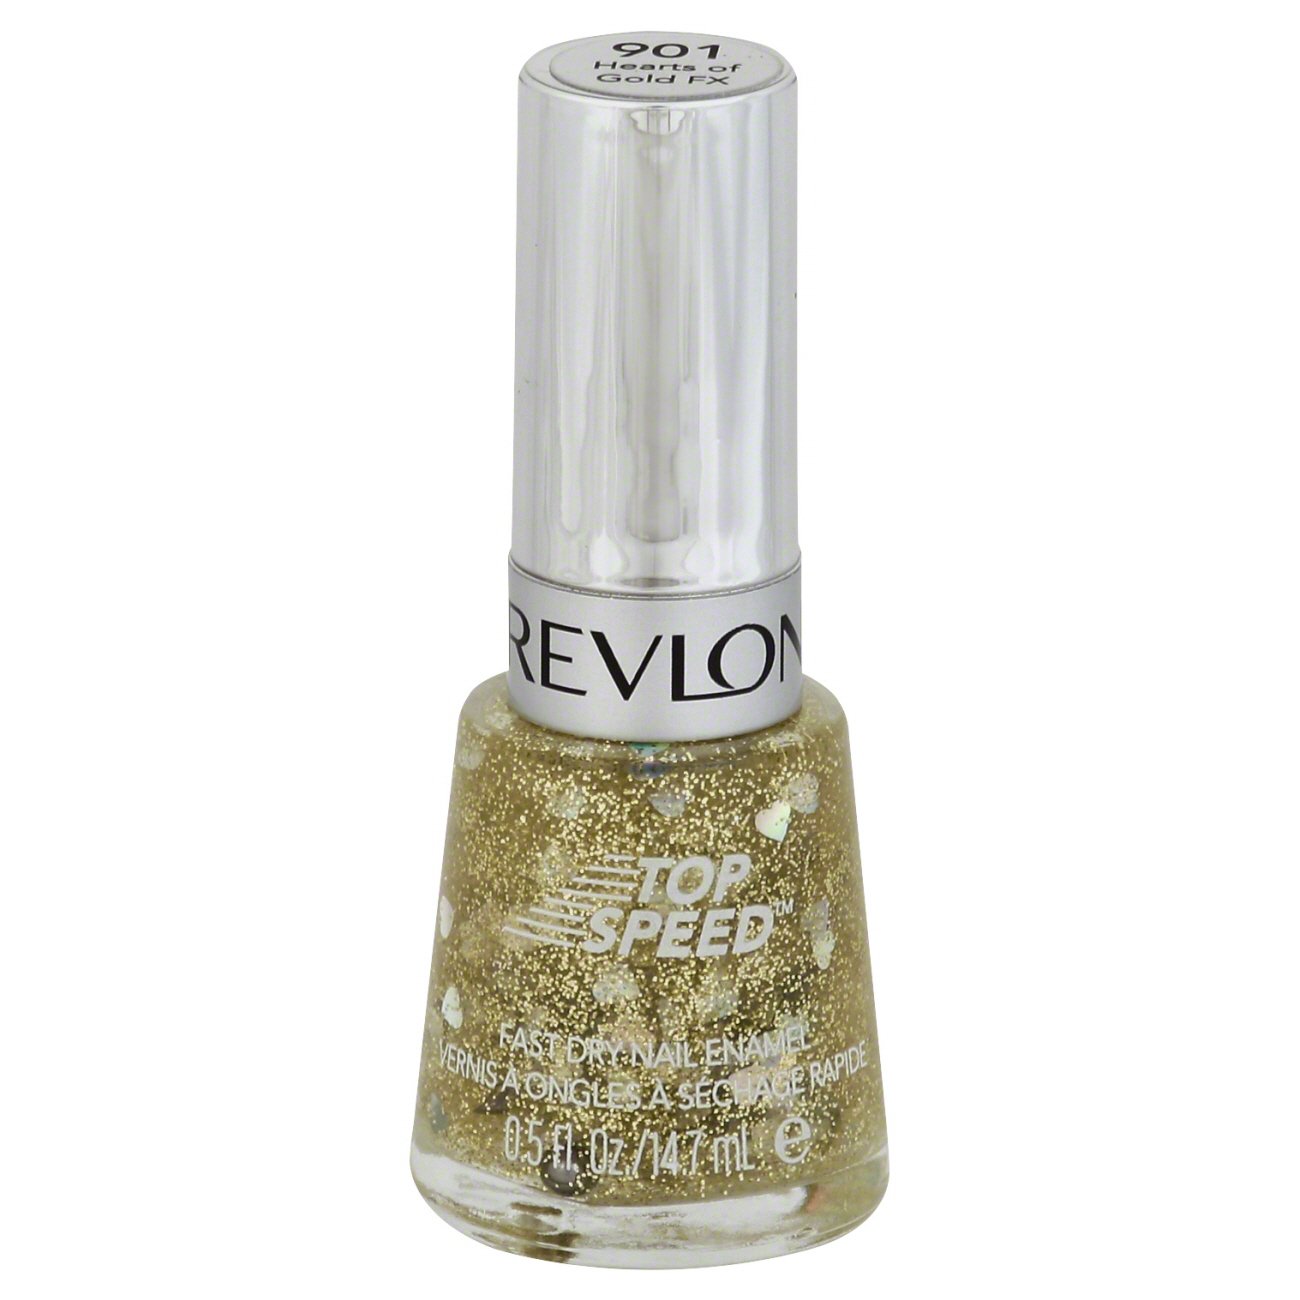 Revlon Top Speed Fast Dry Nail Enamel Hearts of Gold FX - Shop Nails at  H-E-B